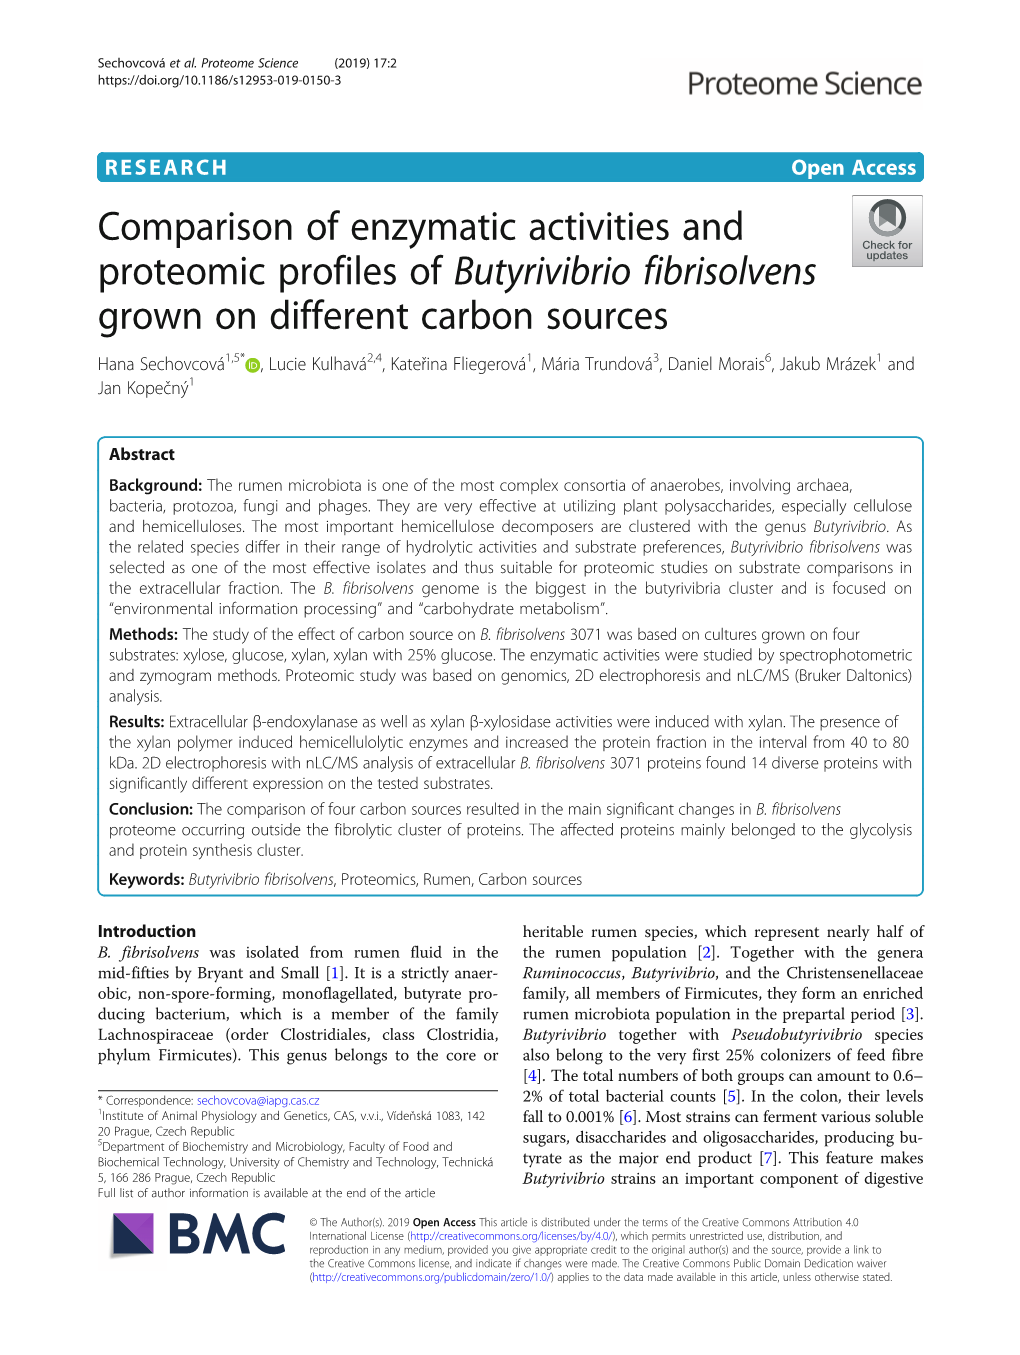 Comparison of Enzymatic Activities and Proteomic Profiles Of